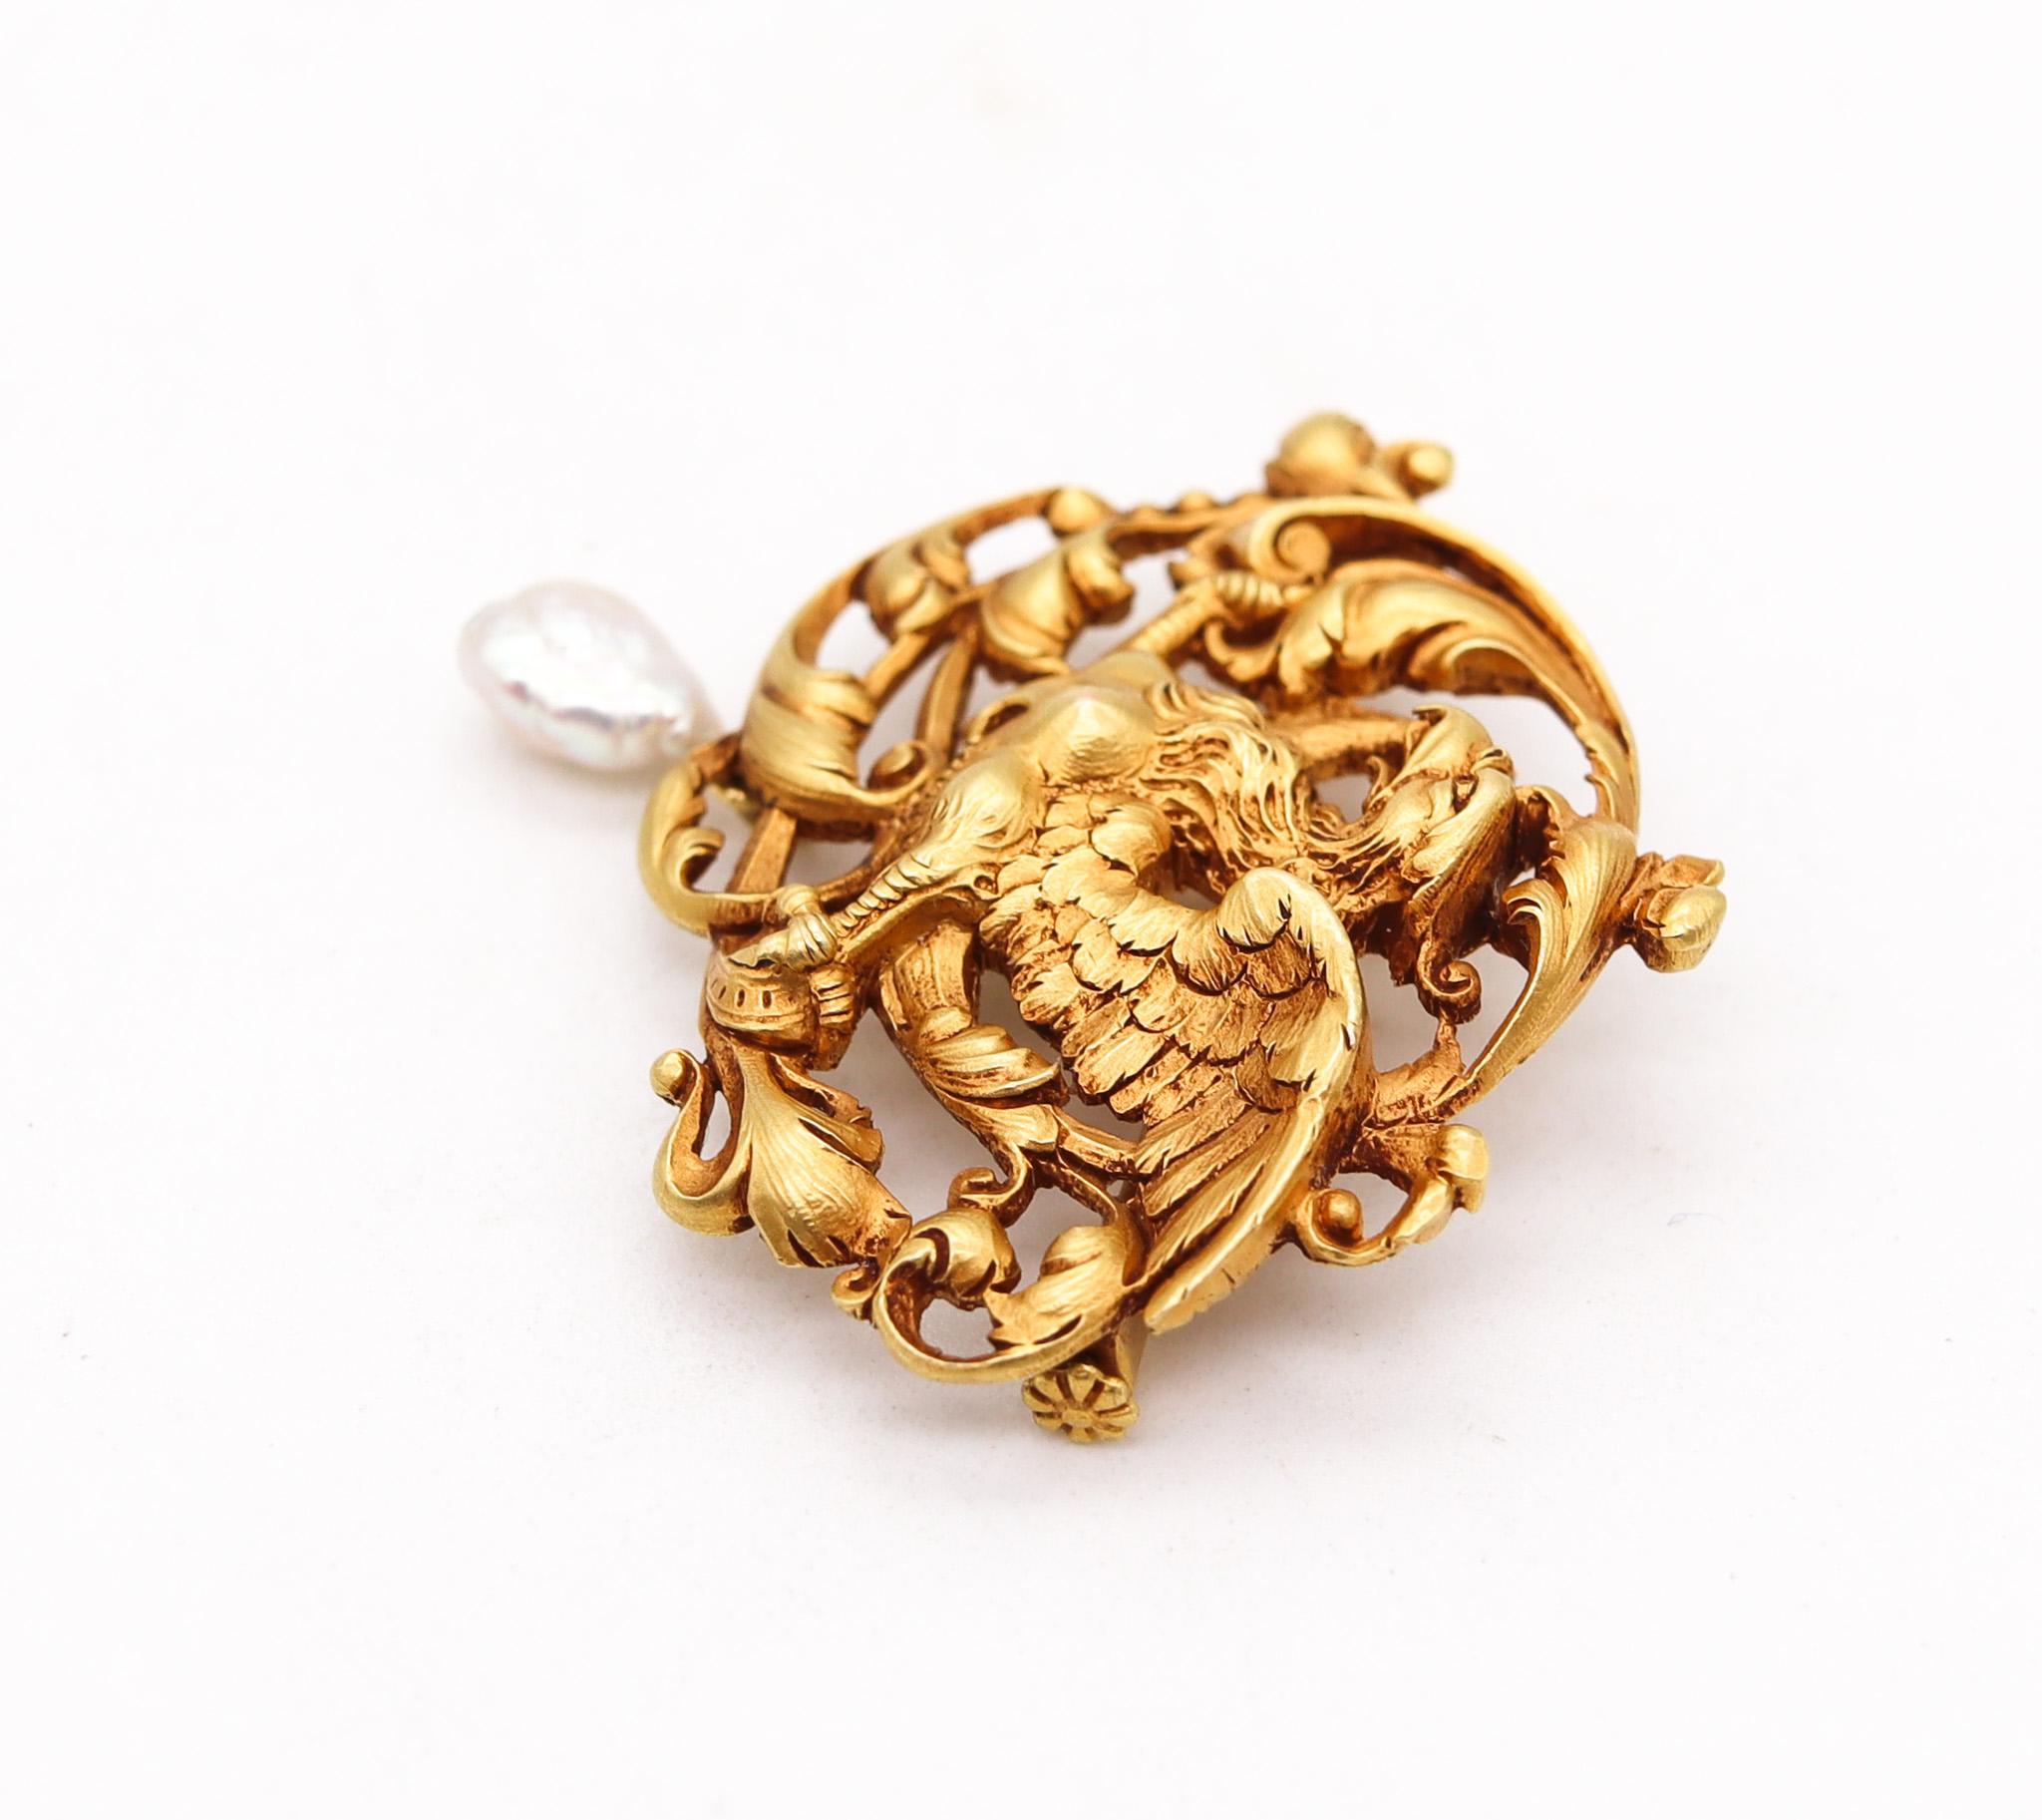 An art nouveau Griffin brooch designed by Gaston Lafitte.

An incredible piece of art created around the 1890, during the art nouveau period in Paris France by the artist goldsmith Gaston Lafitte. This brooch depicts the three dimensional figure in